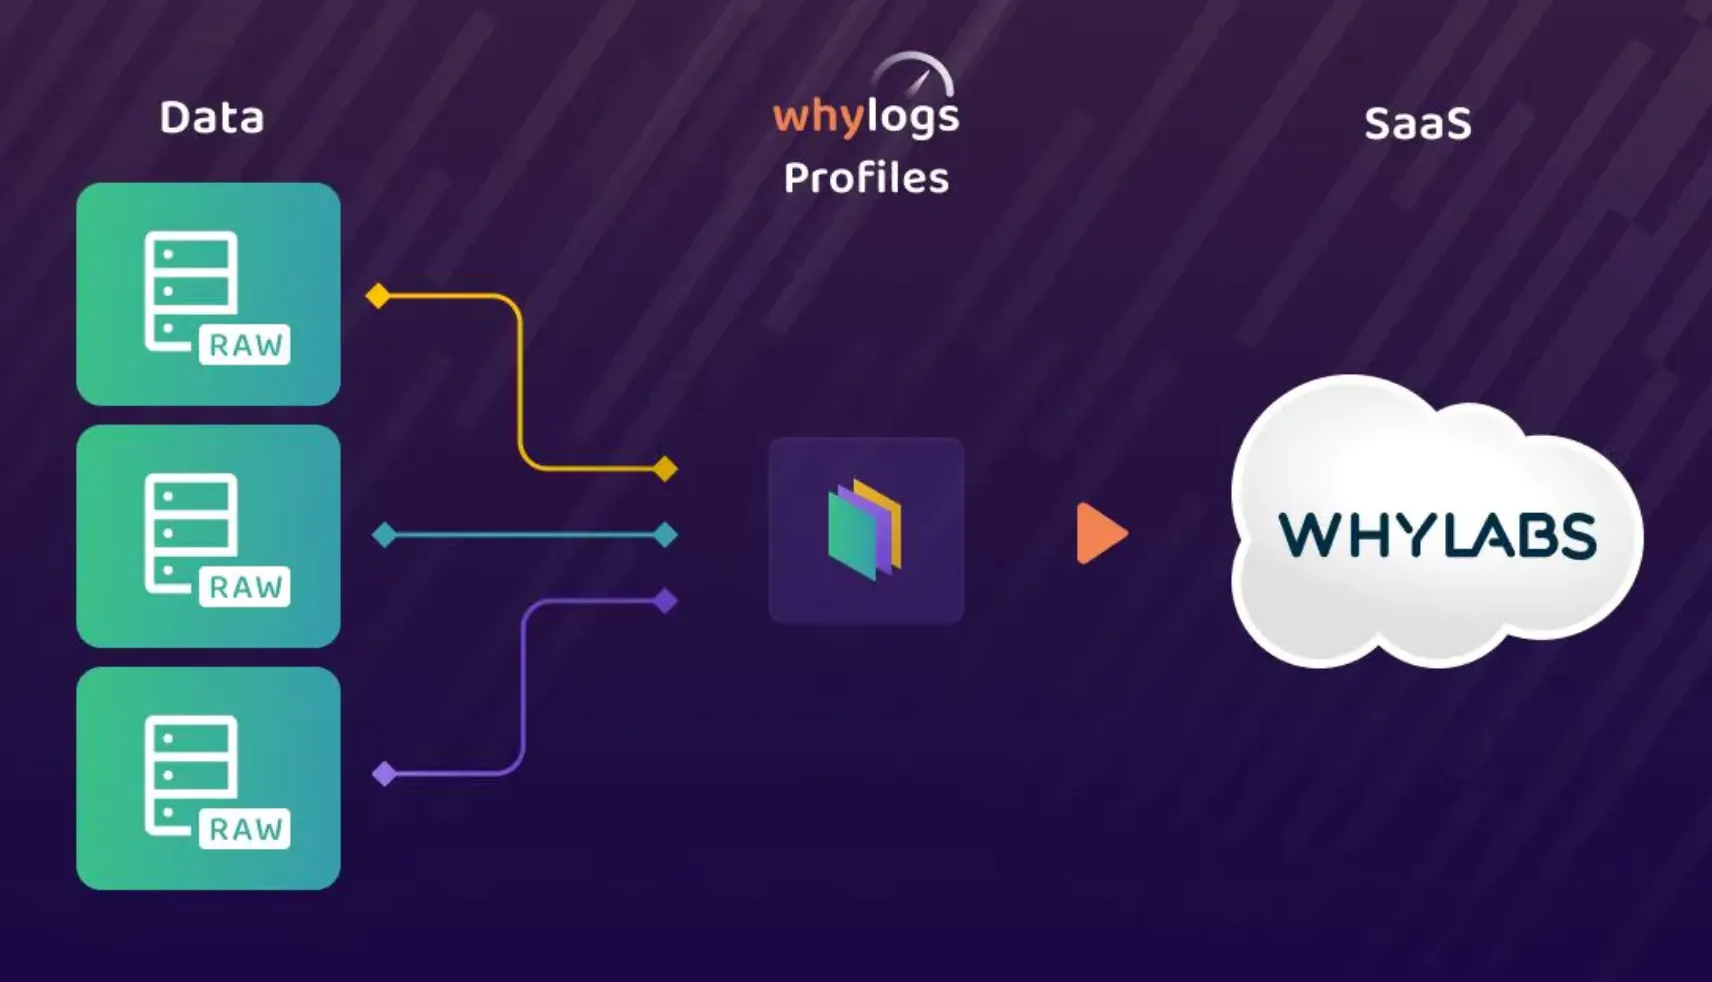 Whylogs and whylabs